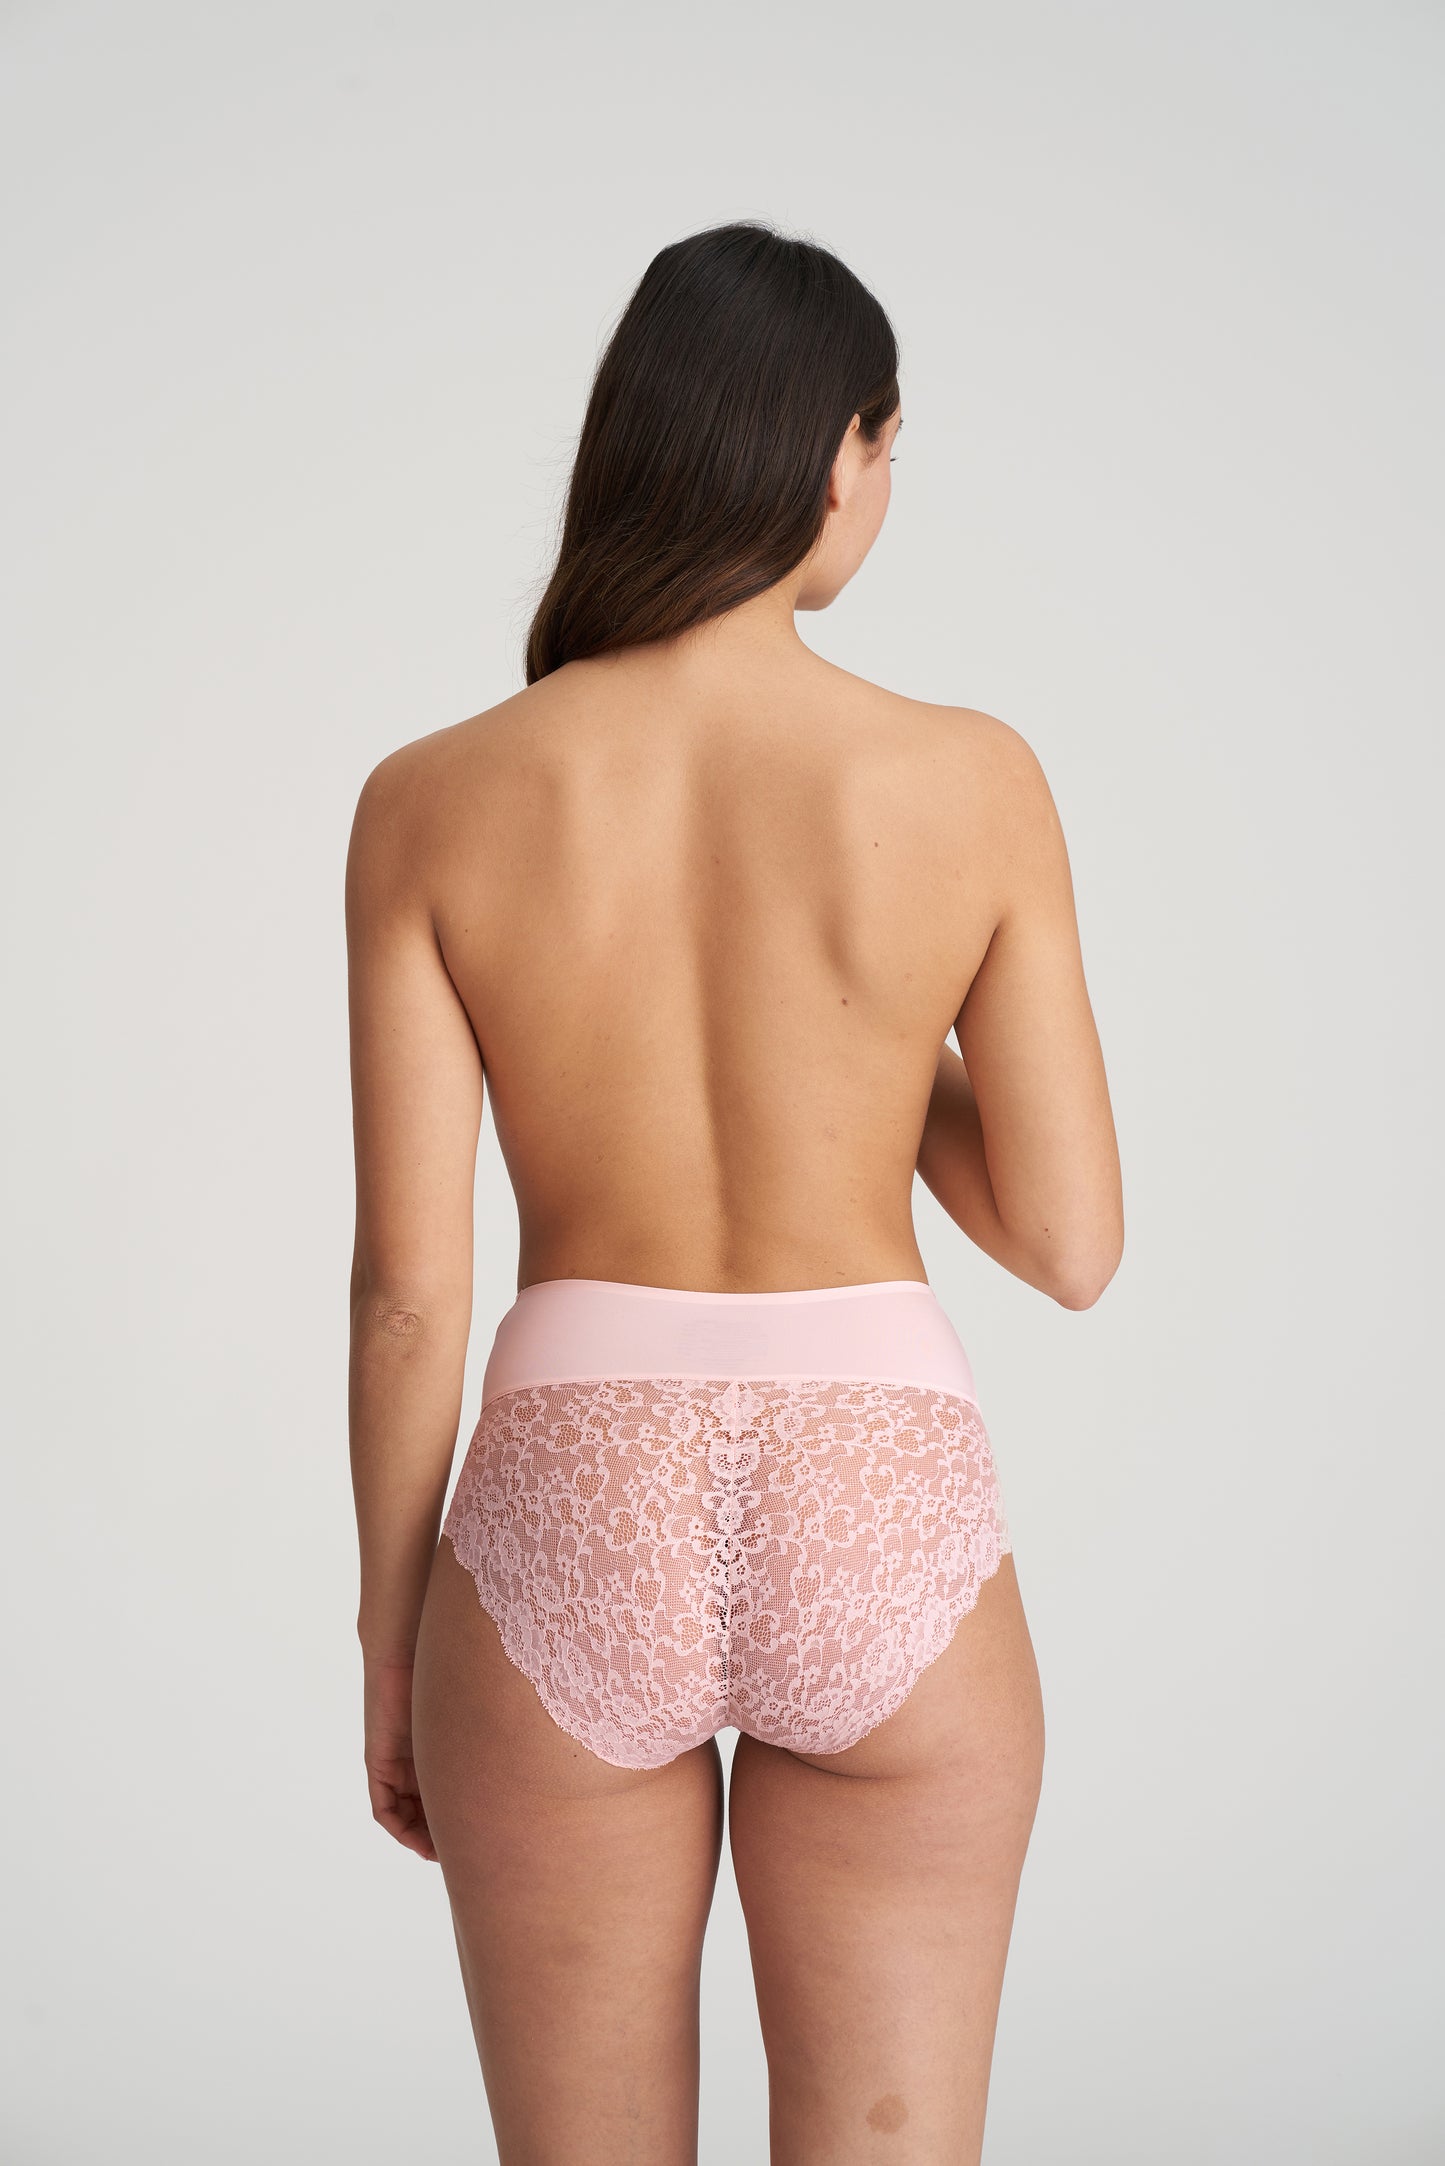 Marie Jo Color studio corrigerende tailleslip pearly pink